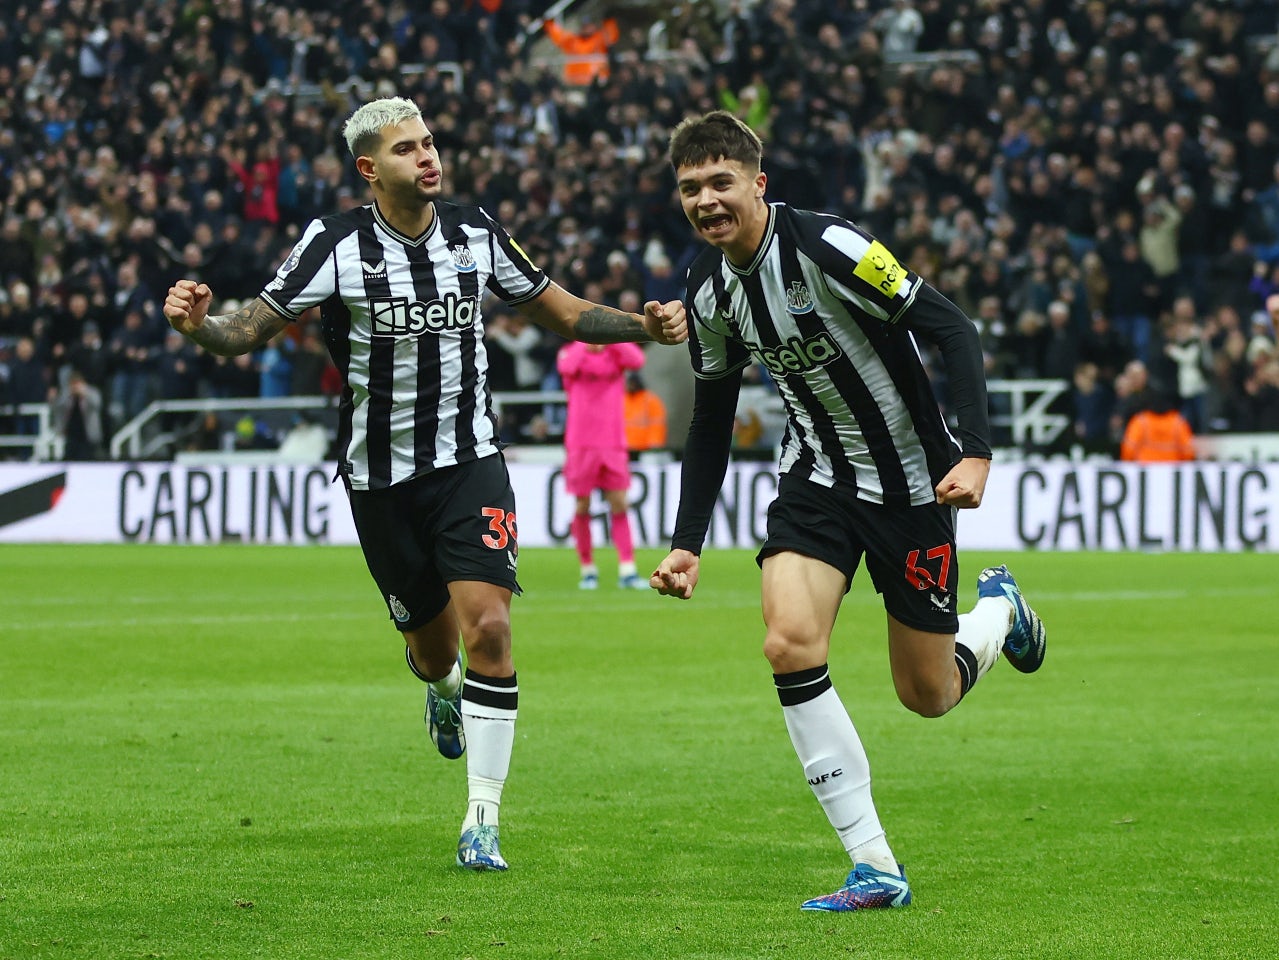 Lewis Miley scores first senior goal as Newcastle United cruise past Fulham